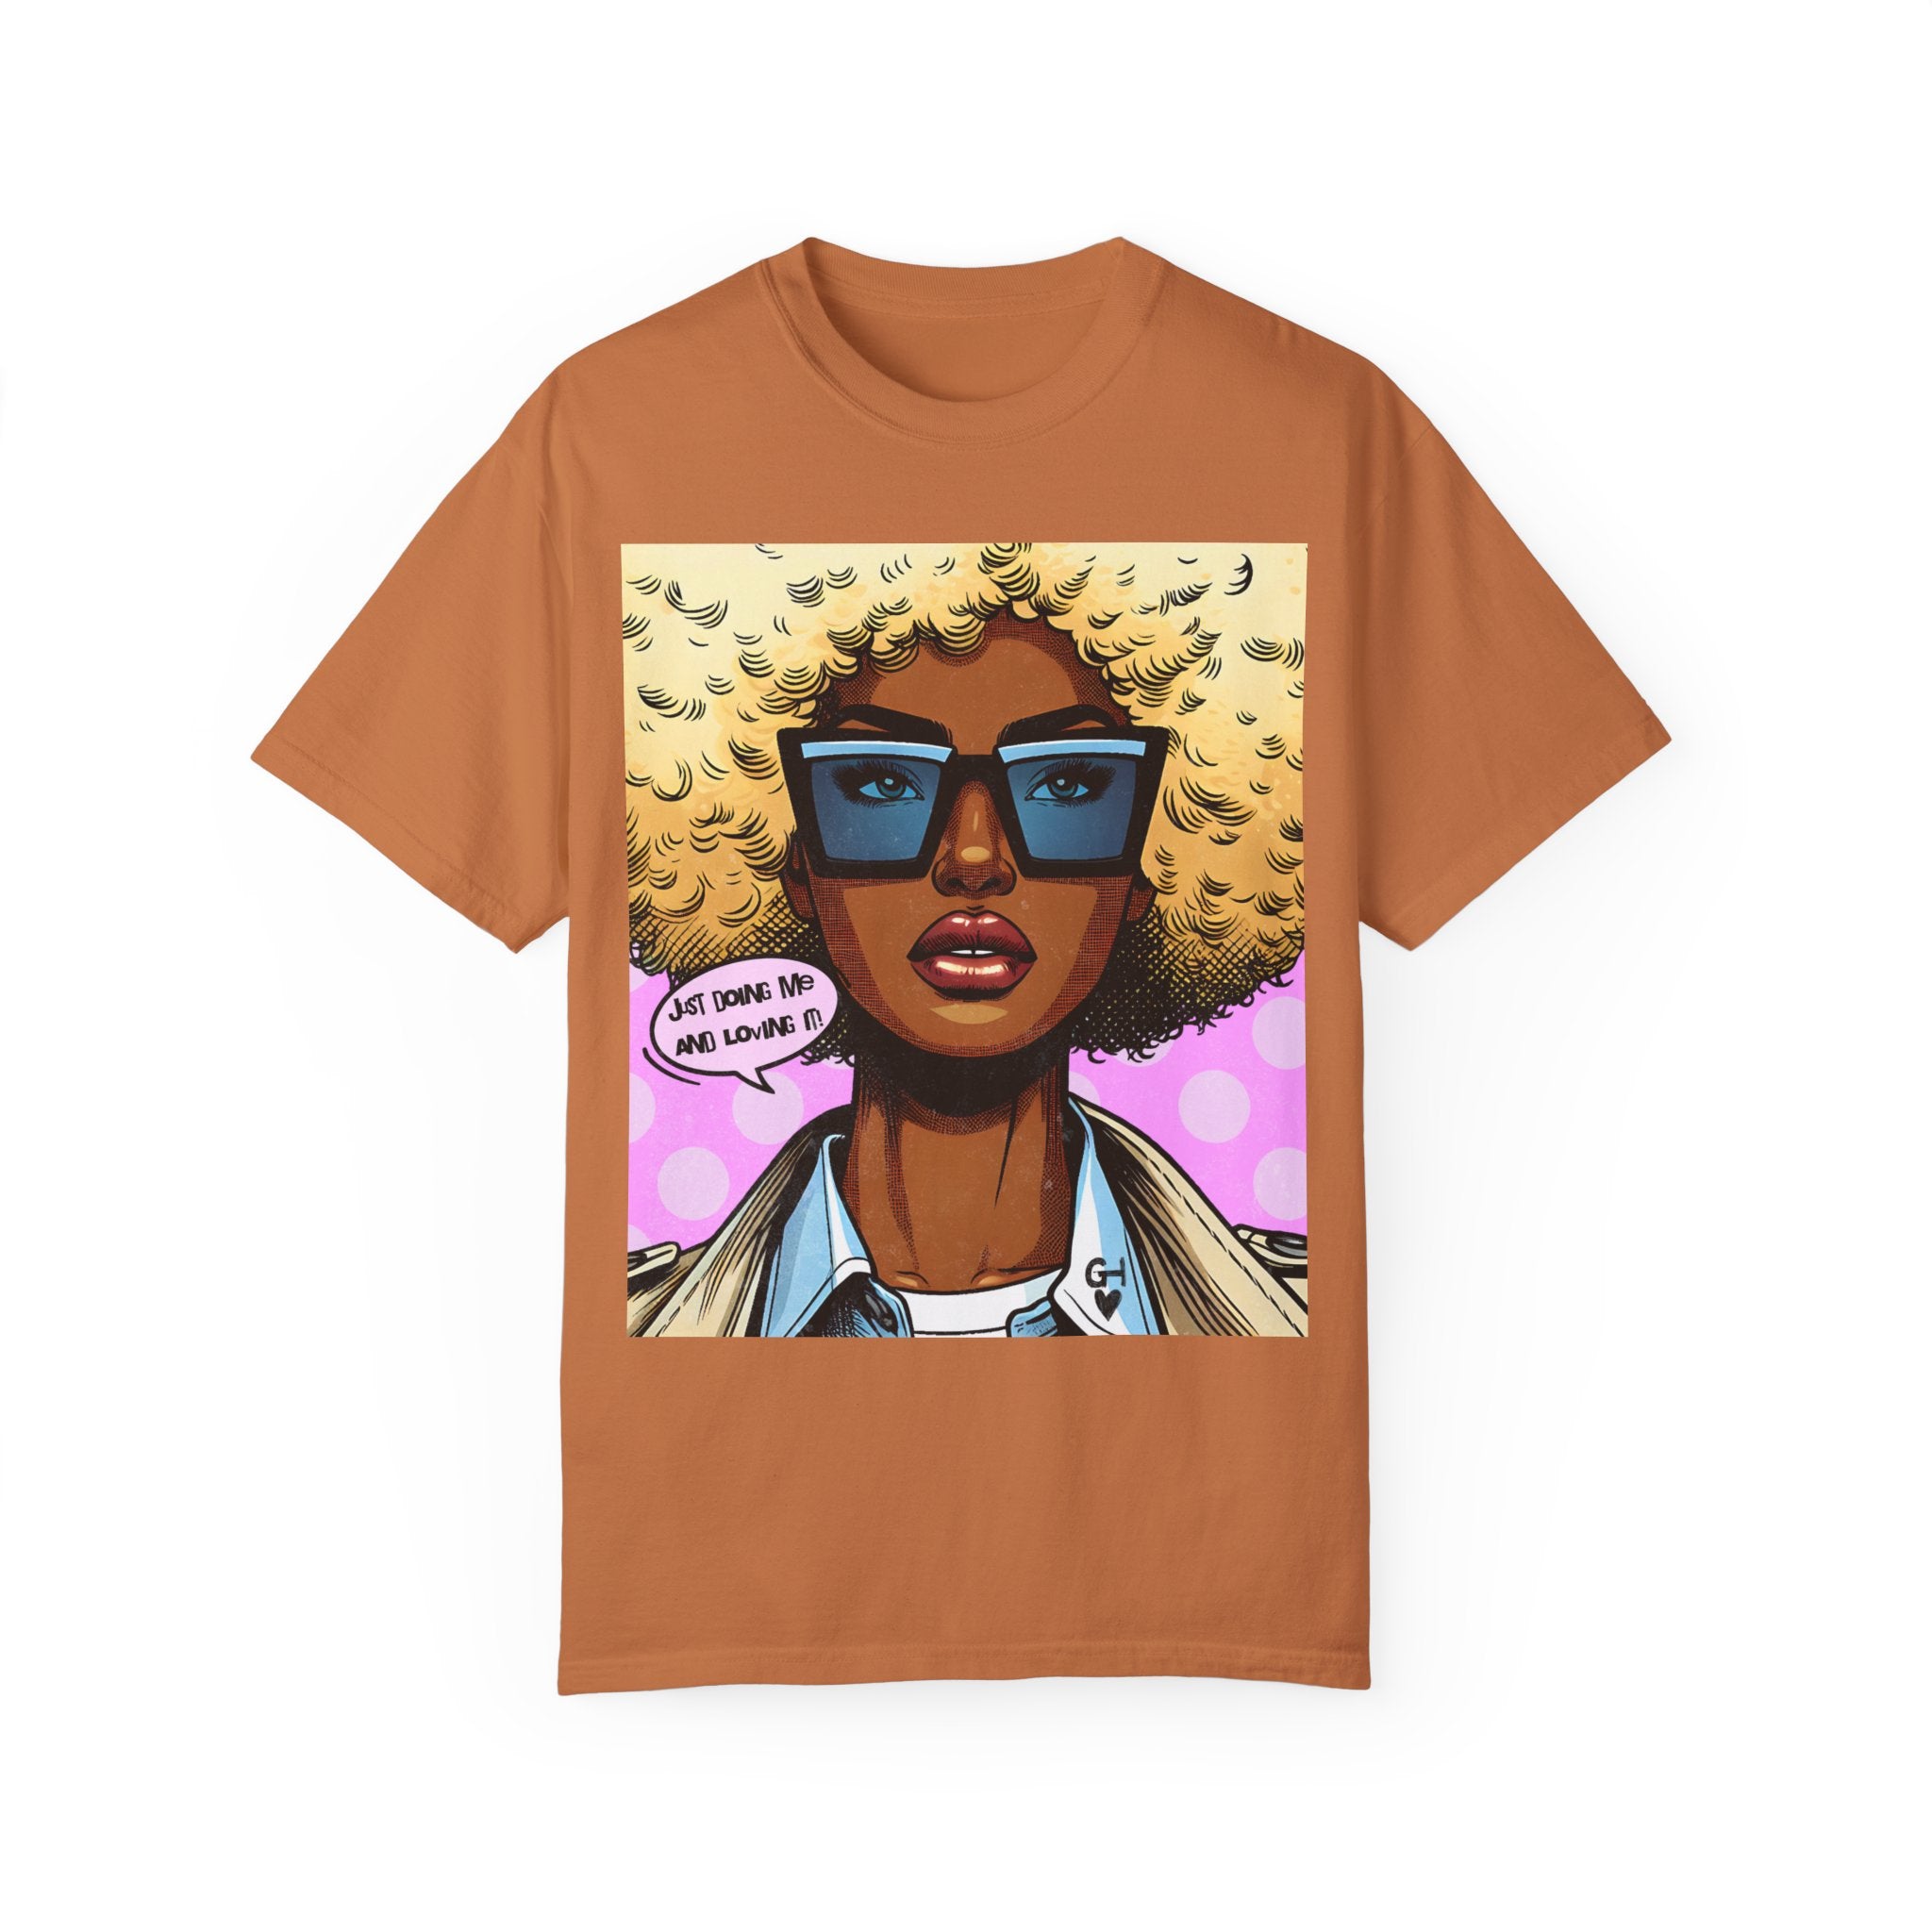 GOLDxTEAL's exclusive stylish comic cartoon graphic T-shirt.